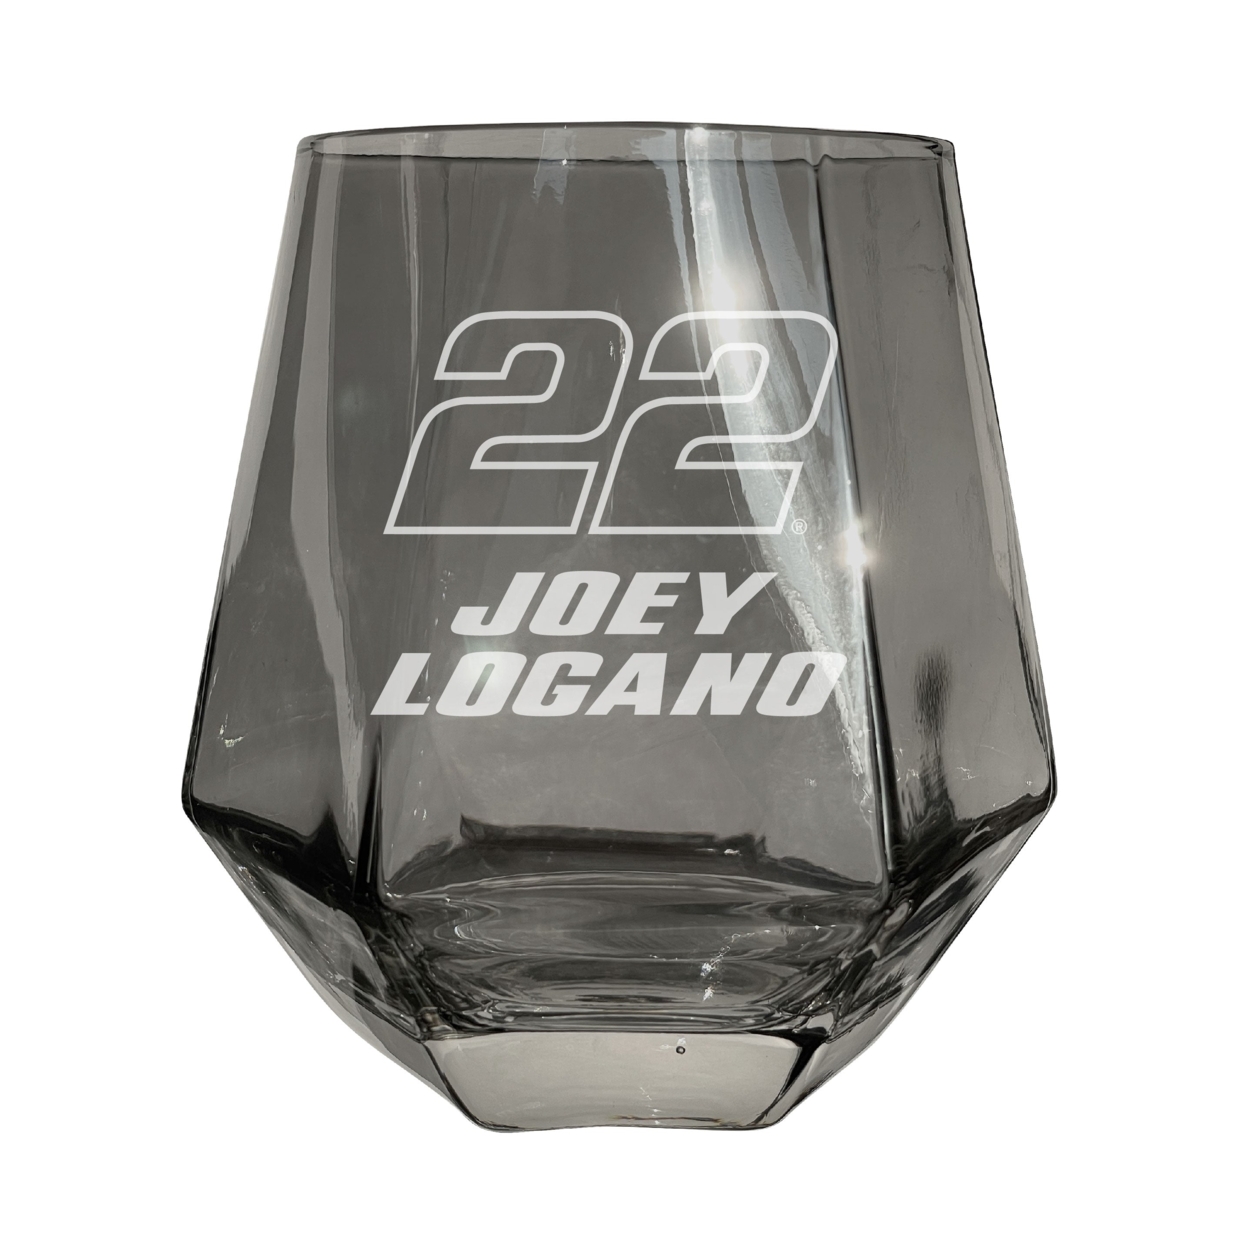 #22 Joey Logano Officially Licensed 10 Oz Engraved Diamond Wine Glass - Iridescent, 2-Pack